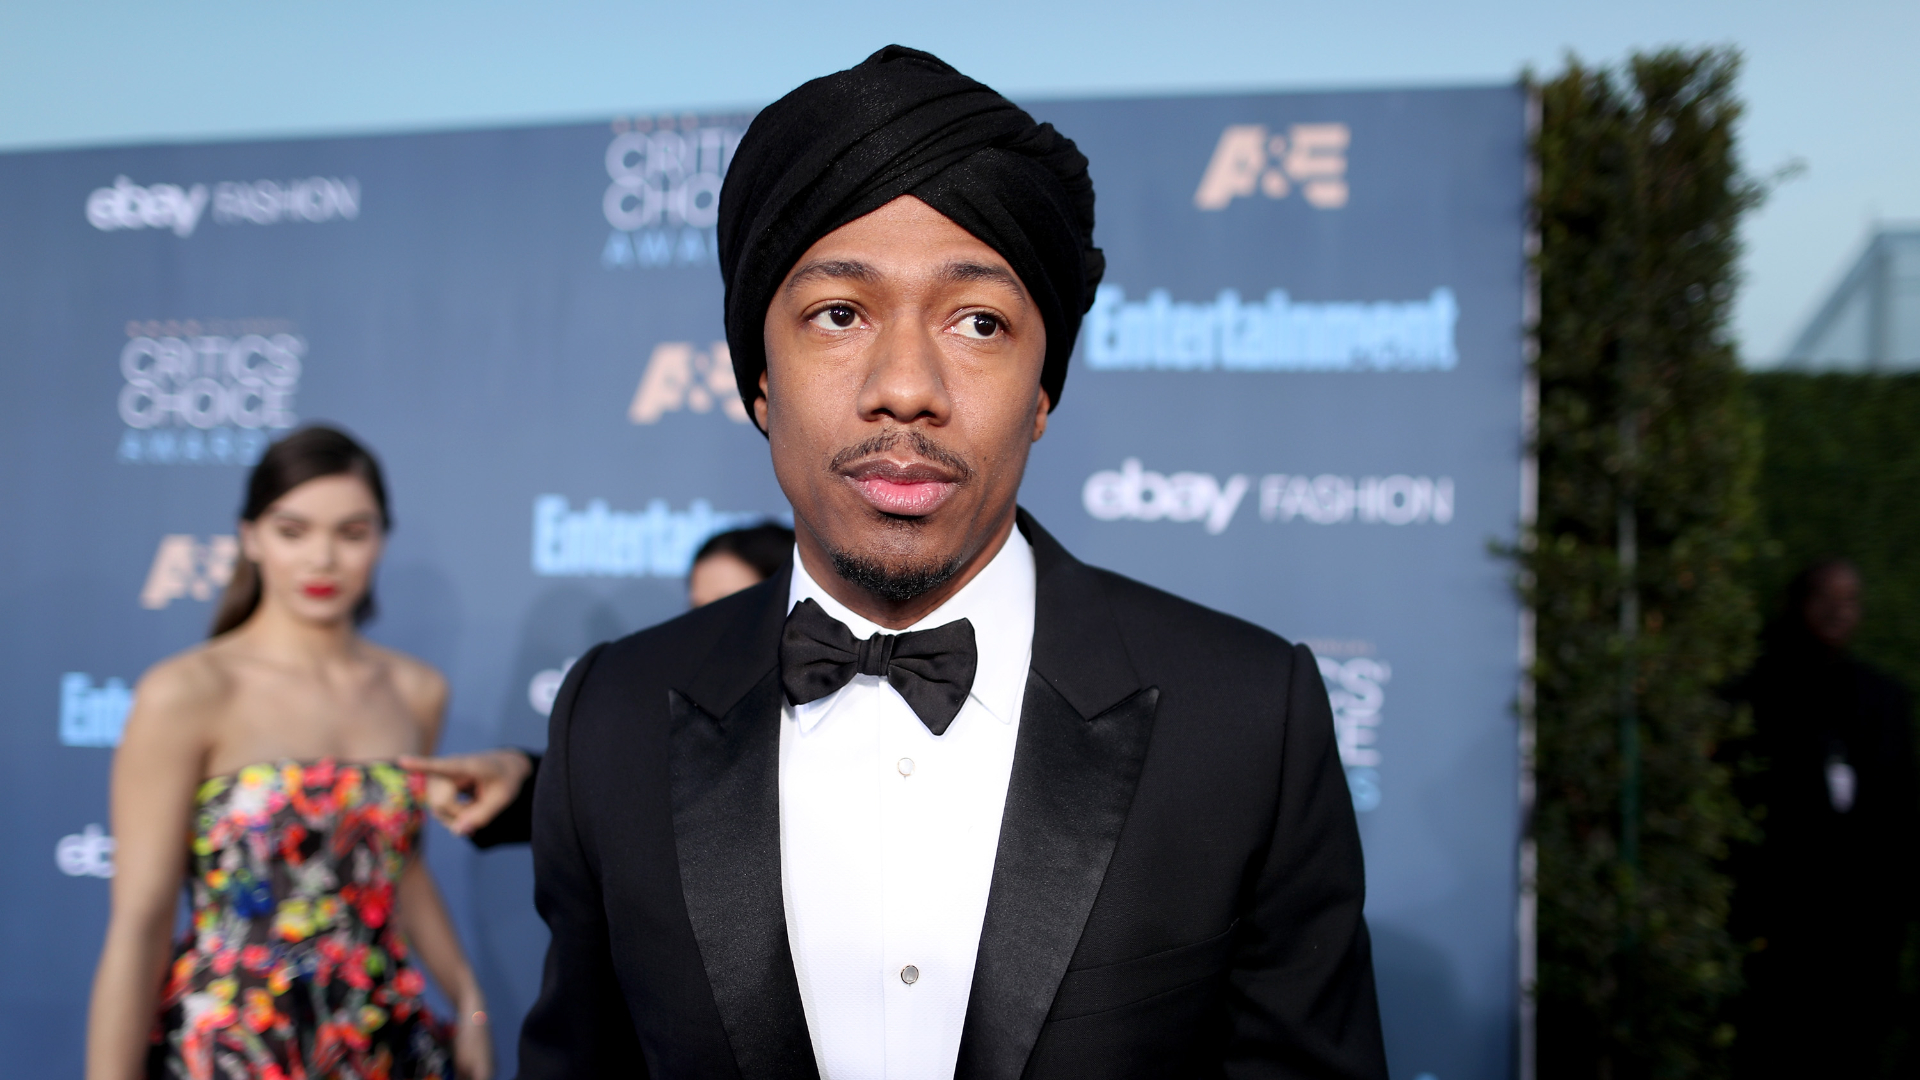 Nick Cannon Tests Positive for COVID-19, Niecy Nash to Fill in as 'Masked Singer' Host